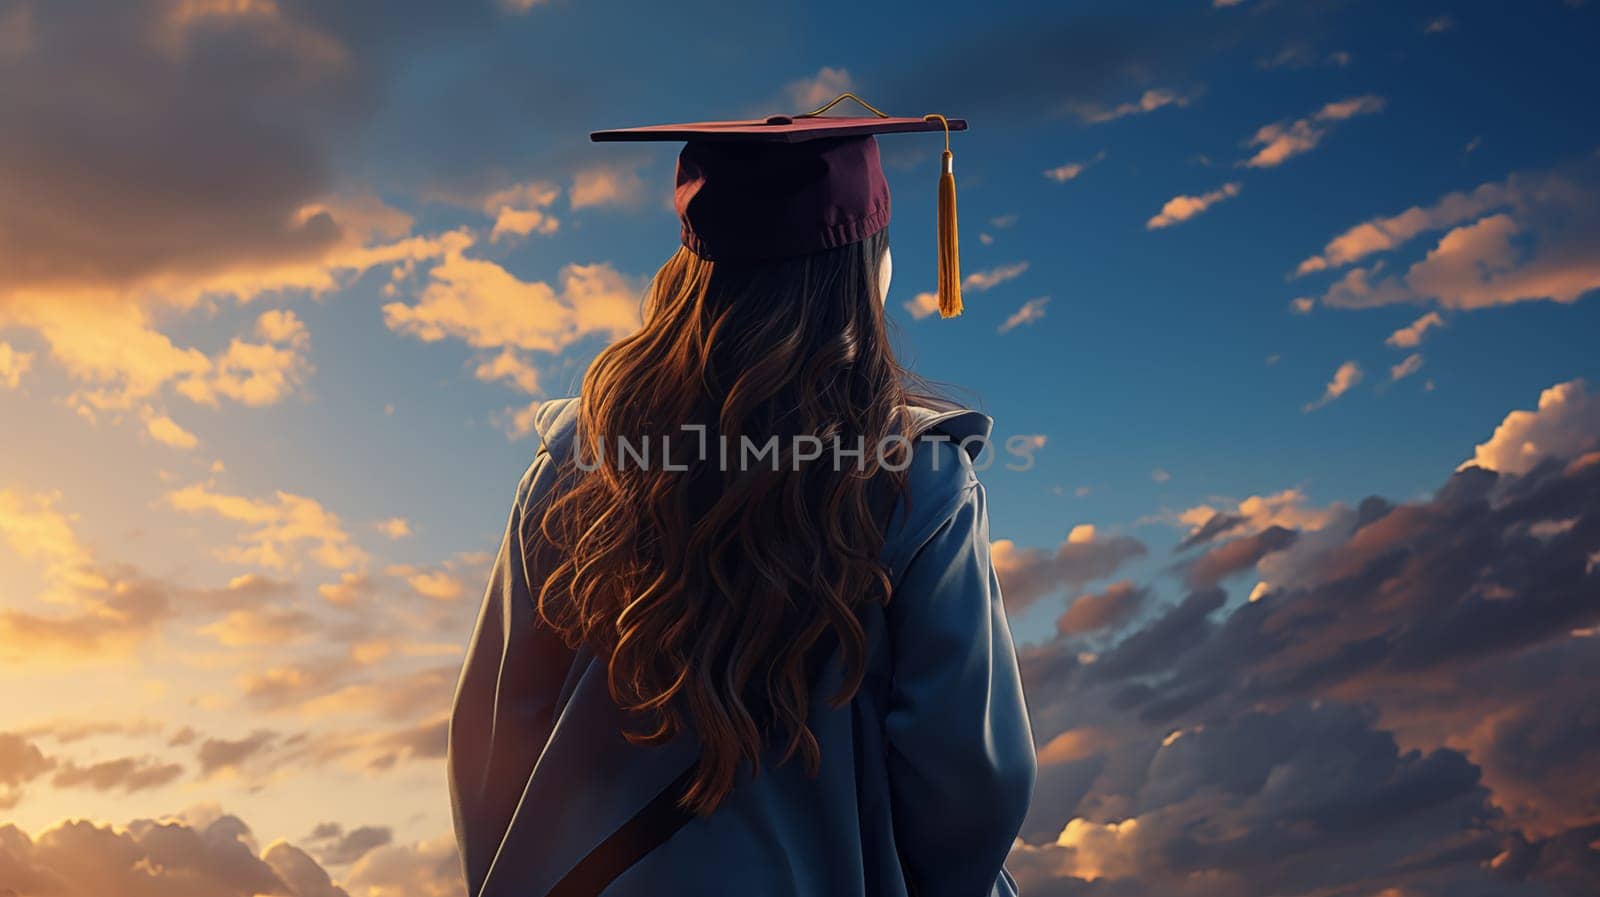 A rear view of a graduate girl, standing outdoors against a background of sunset sky.